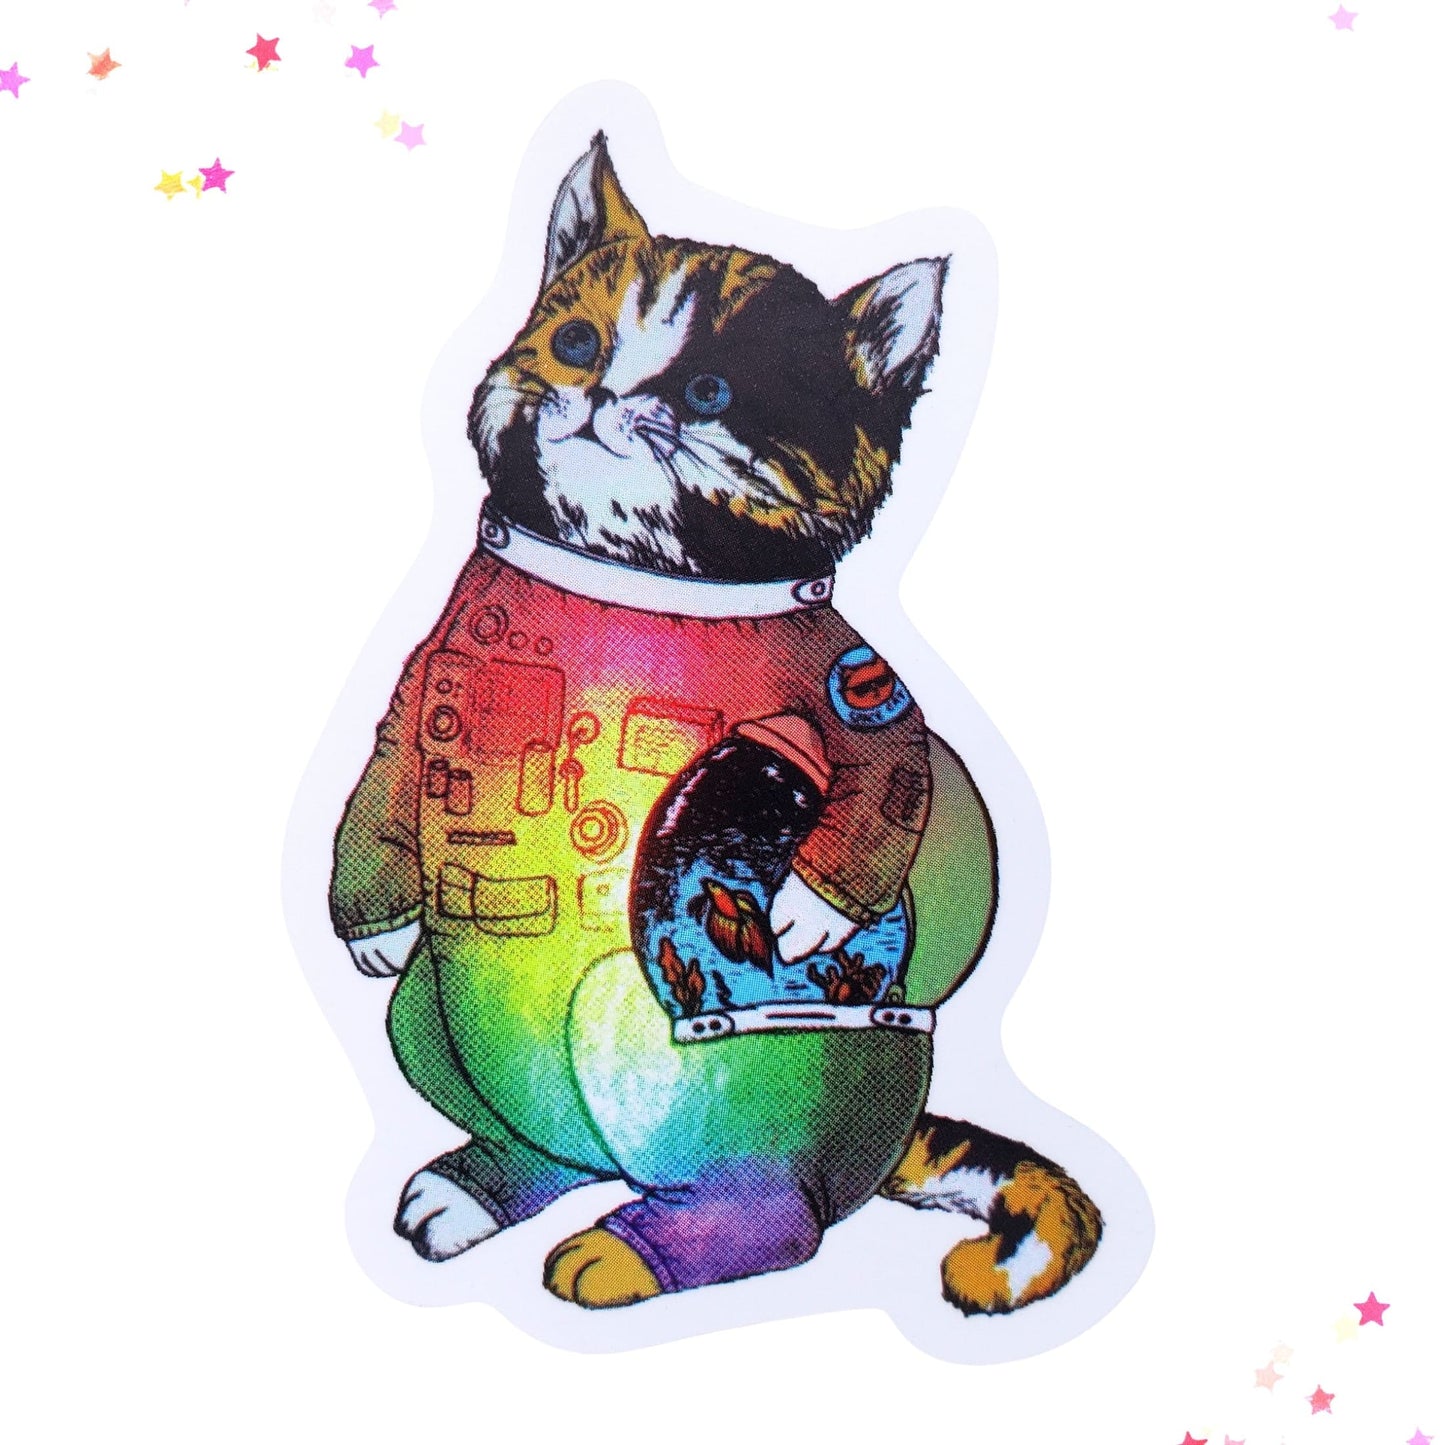 Calico Cat Astronaut Waterproof Sticker | Astro Cat from Confetti Kitty, Only 1.00